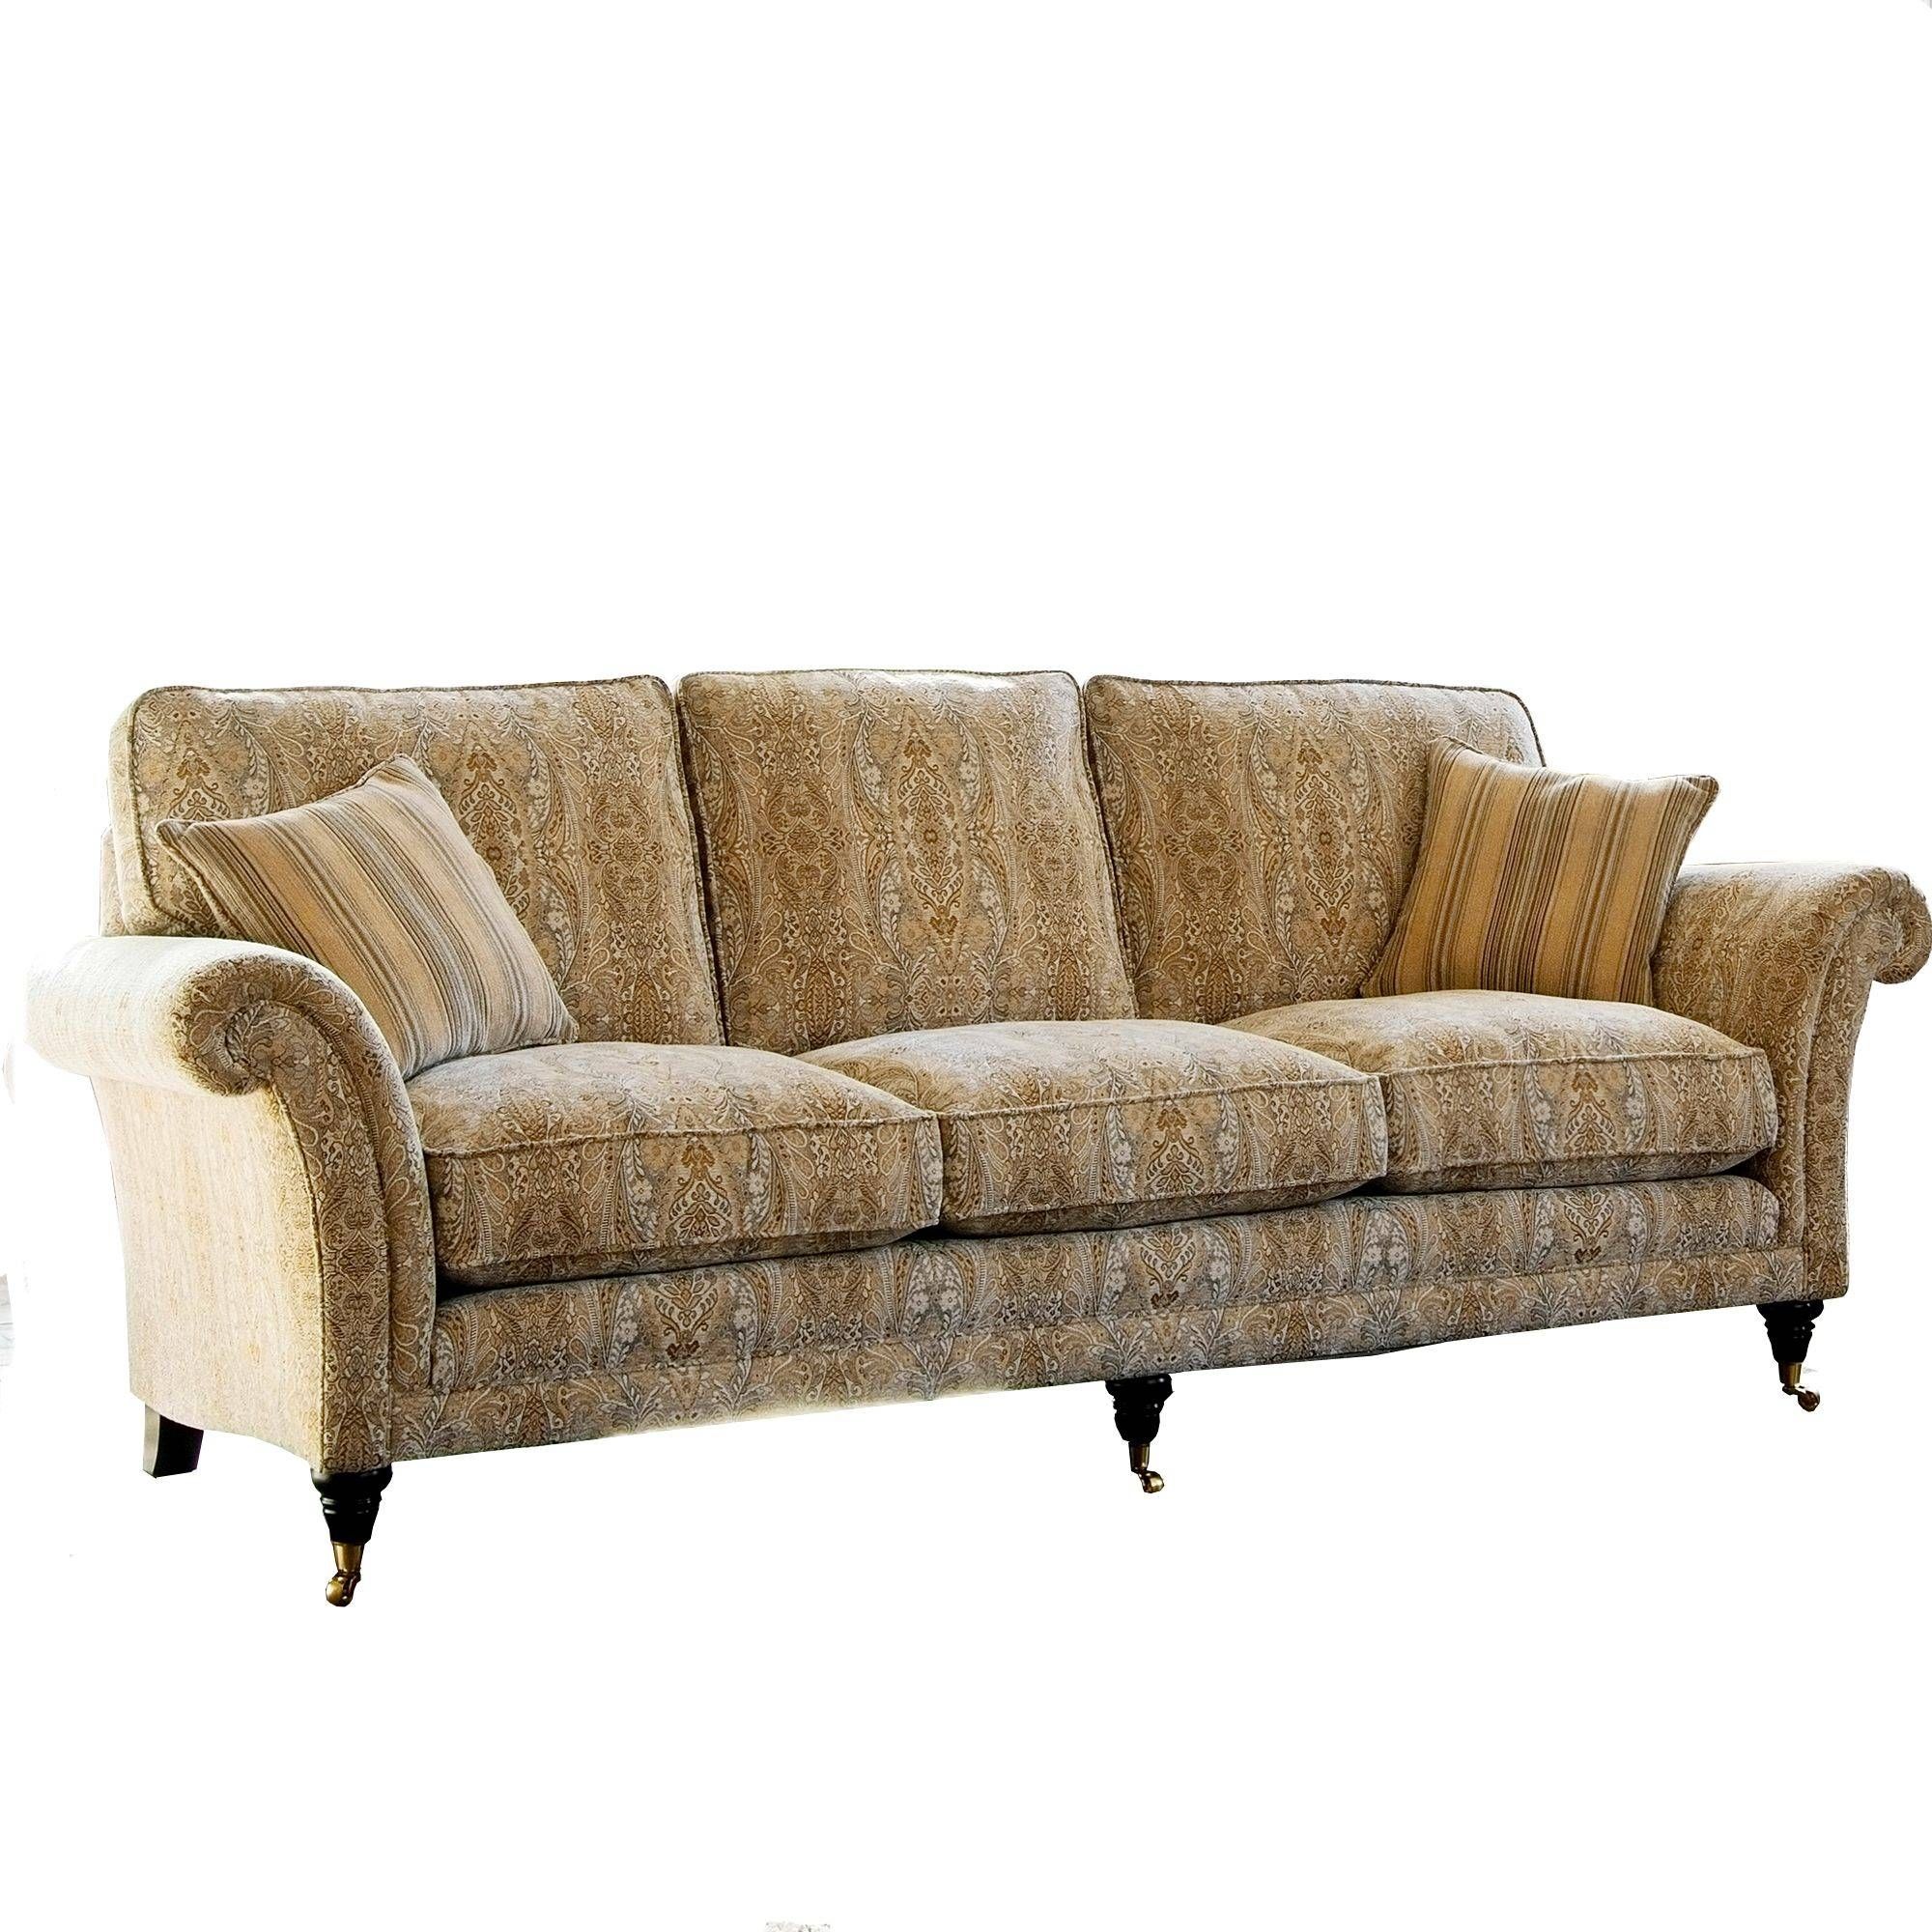 Parker Knoll Burghley Grand Sofa – Leather Sofas – Cookes Furniture In Knoll Sofas (View 2 of 15)